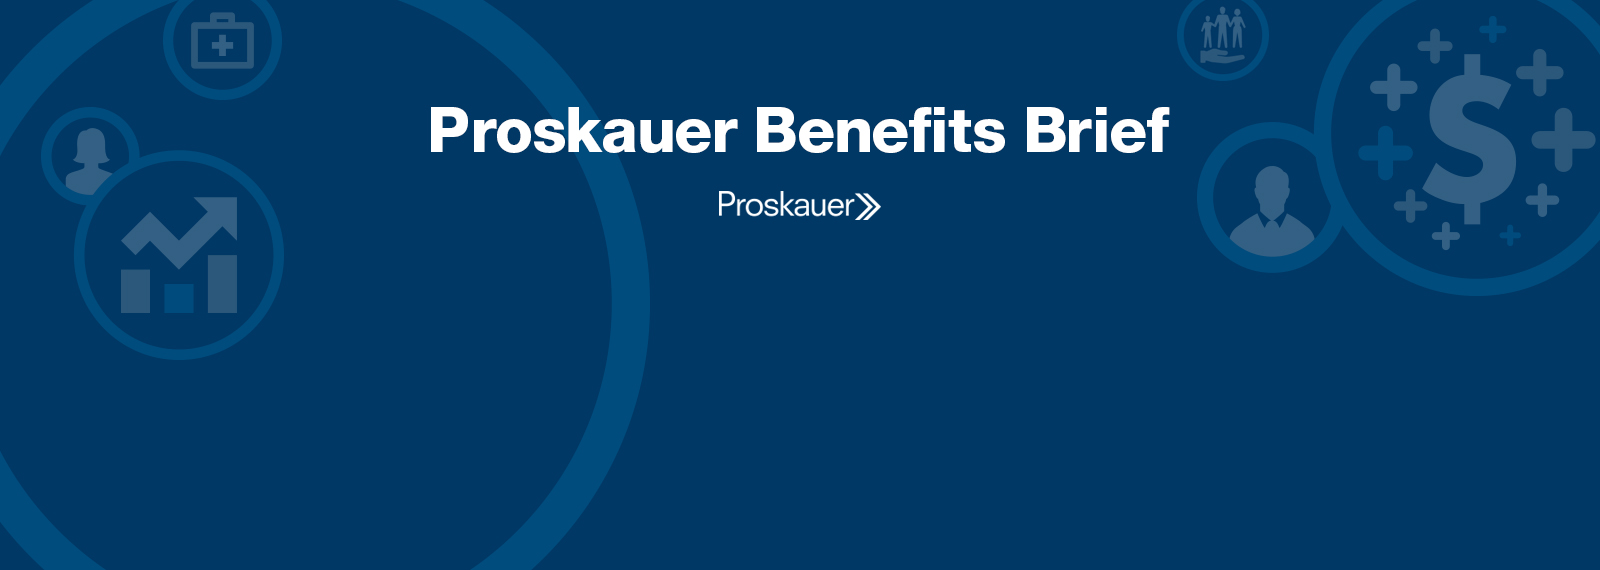 Proskauer Benefits Brief: Legal Insight on Employee Benefits & Executive Compensation